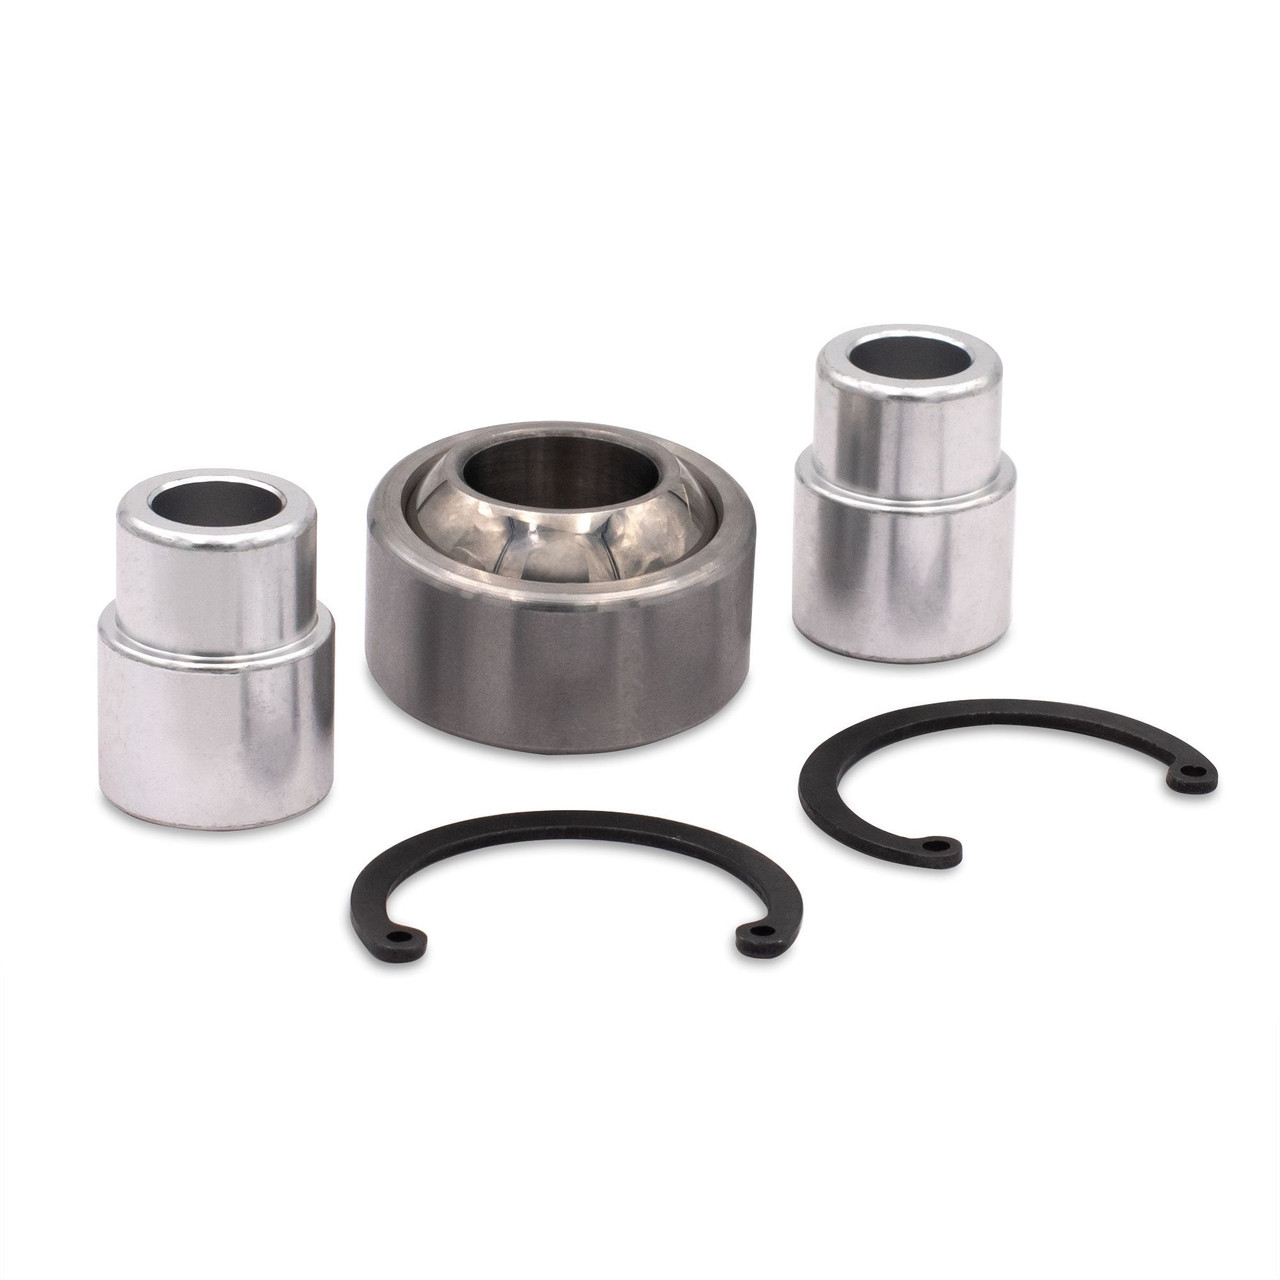 Replacement Spherical Bearing; Includes 1 Bearing, 2 Inserts & 2 Clips